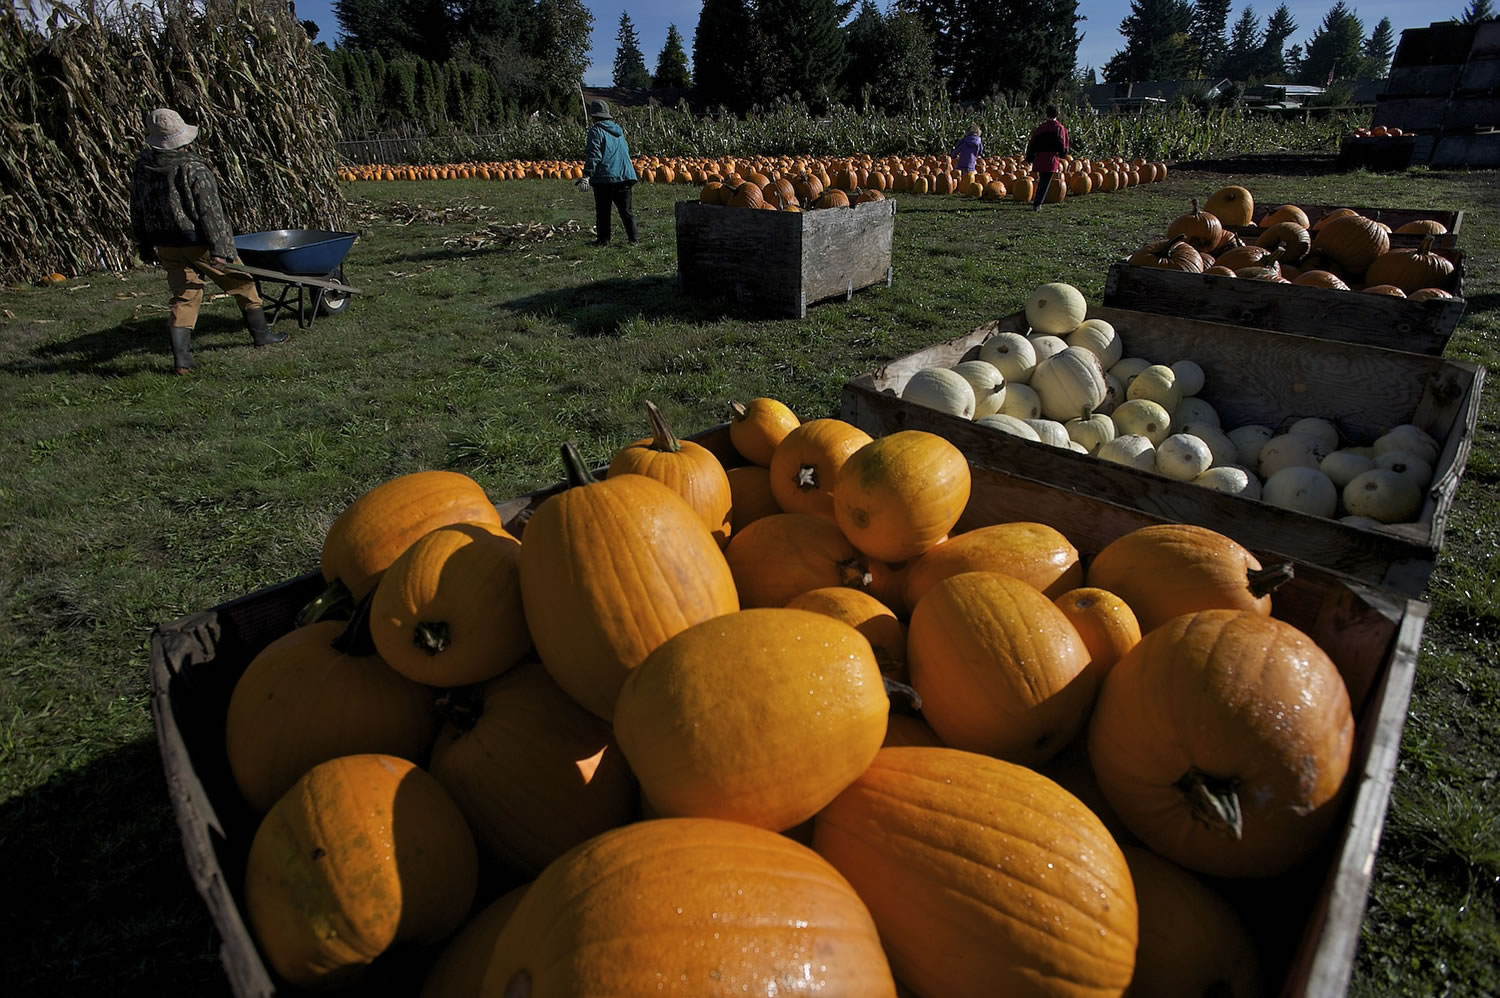 The pumpkin patch at Joe's Place Farm is open Saturdays and Sundays through October.